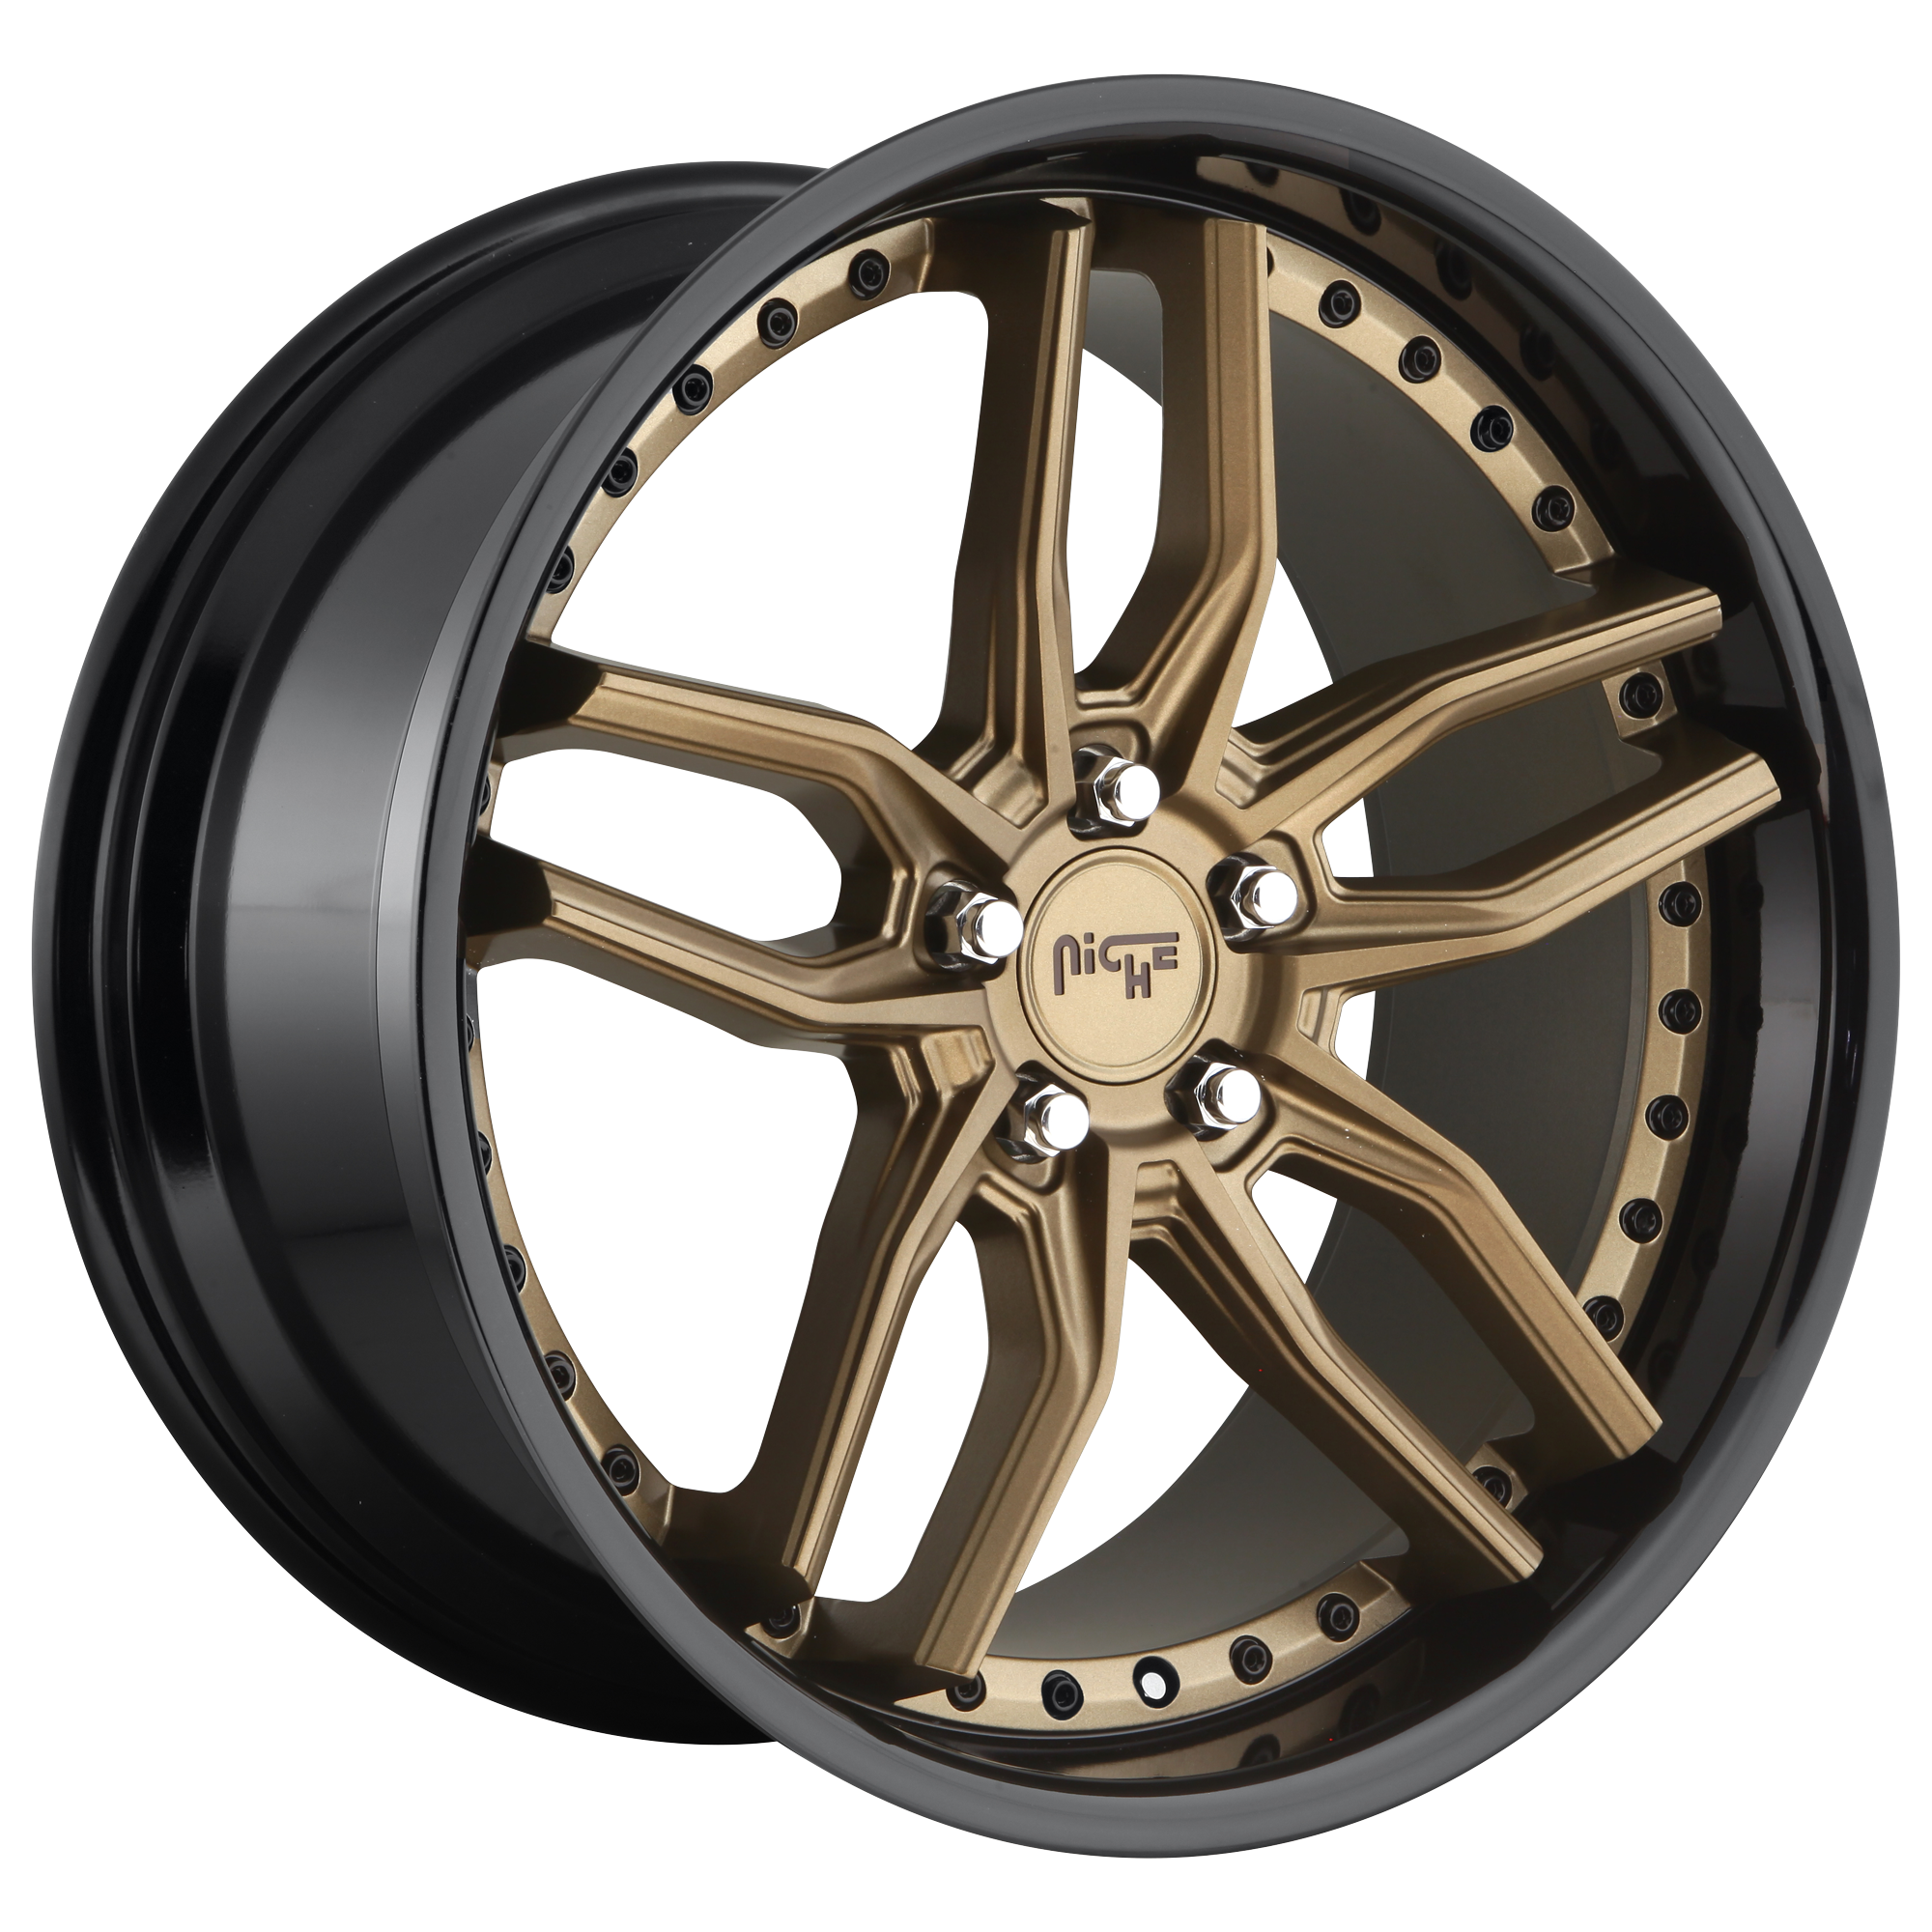 METHOS 19x8.5 5x120.00 MATTE BRONZE BLACK BEAD RING (35 mm) - Tires and Engine Performance